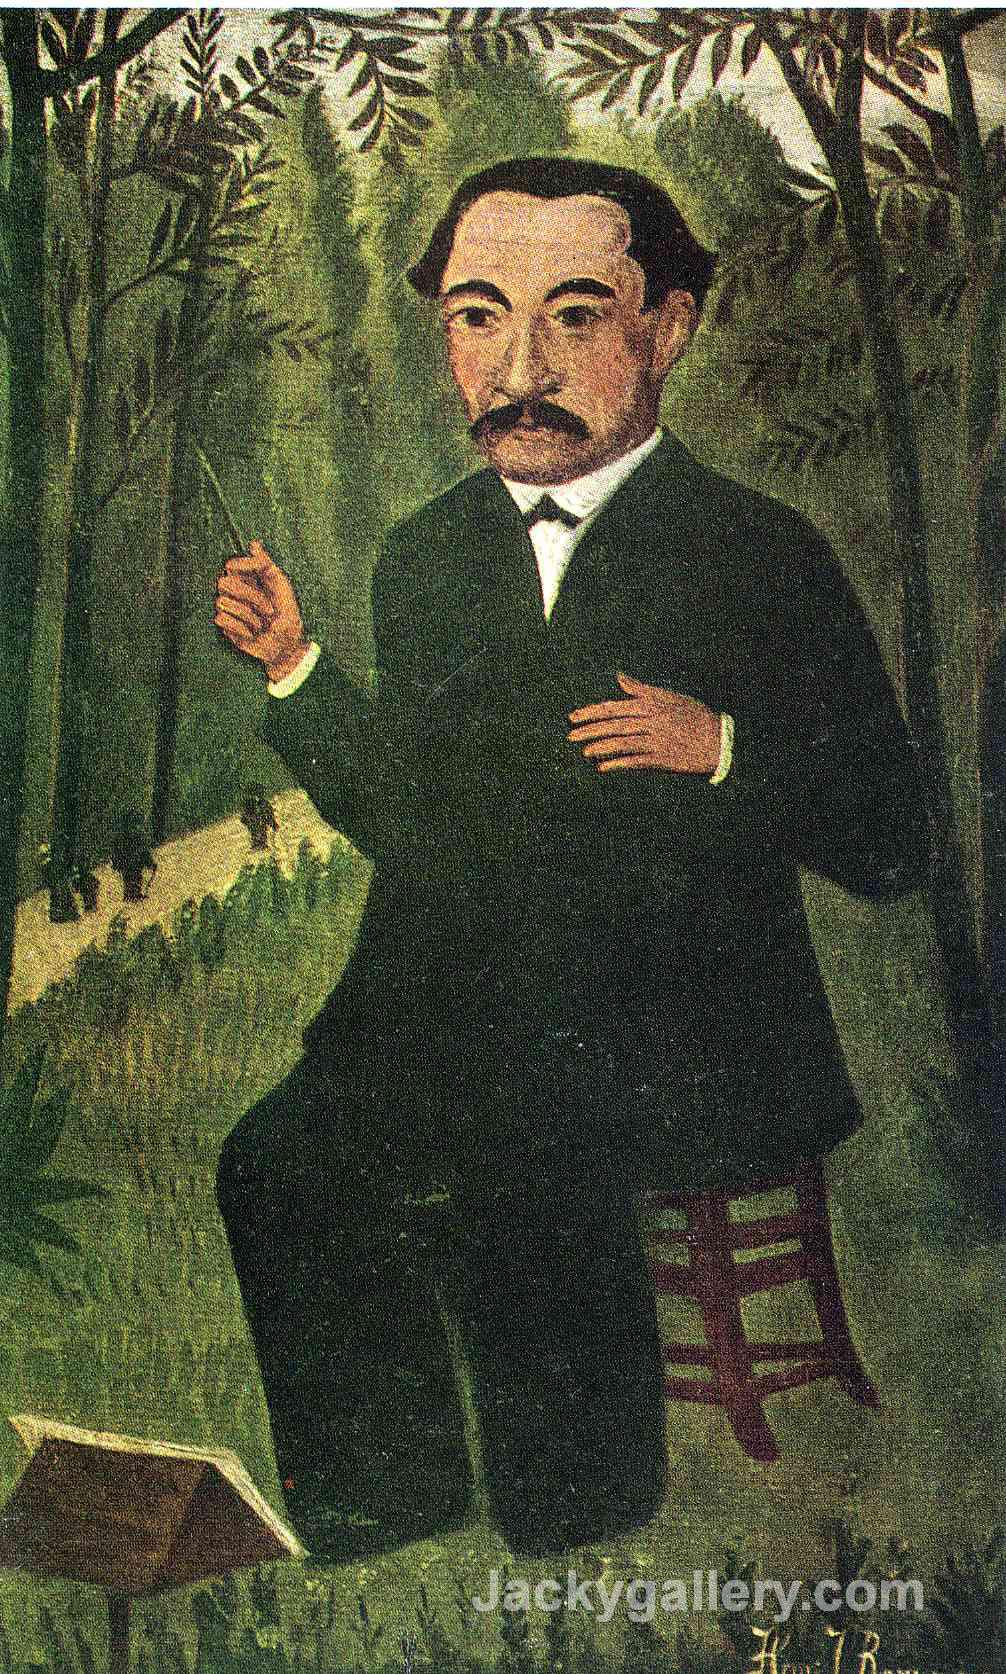 Henri Rousseau as Orchestra Conductor by Henri Rousseau paintings reproduction